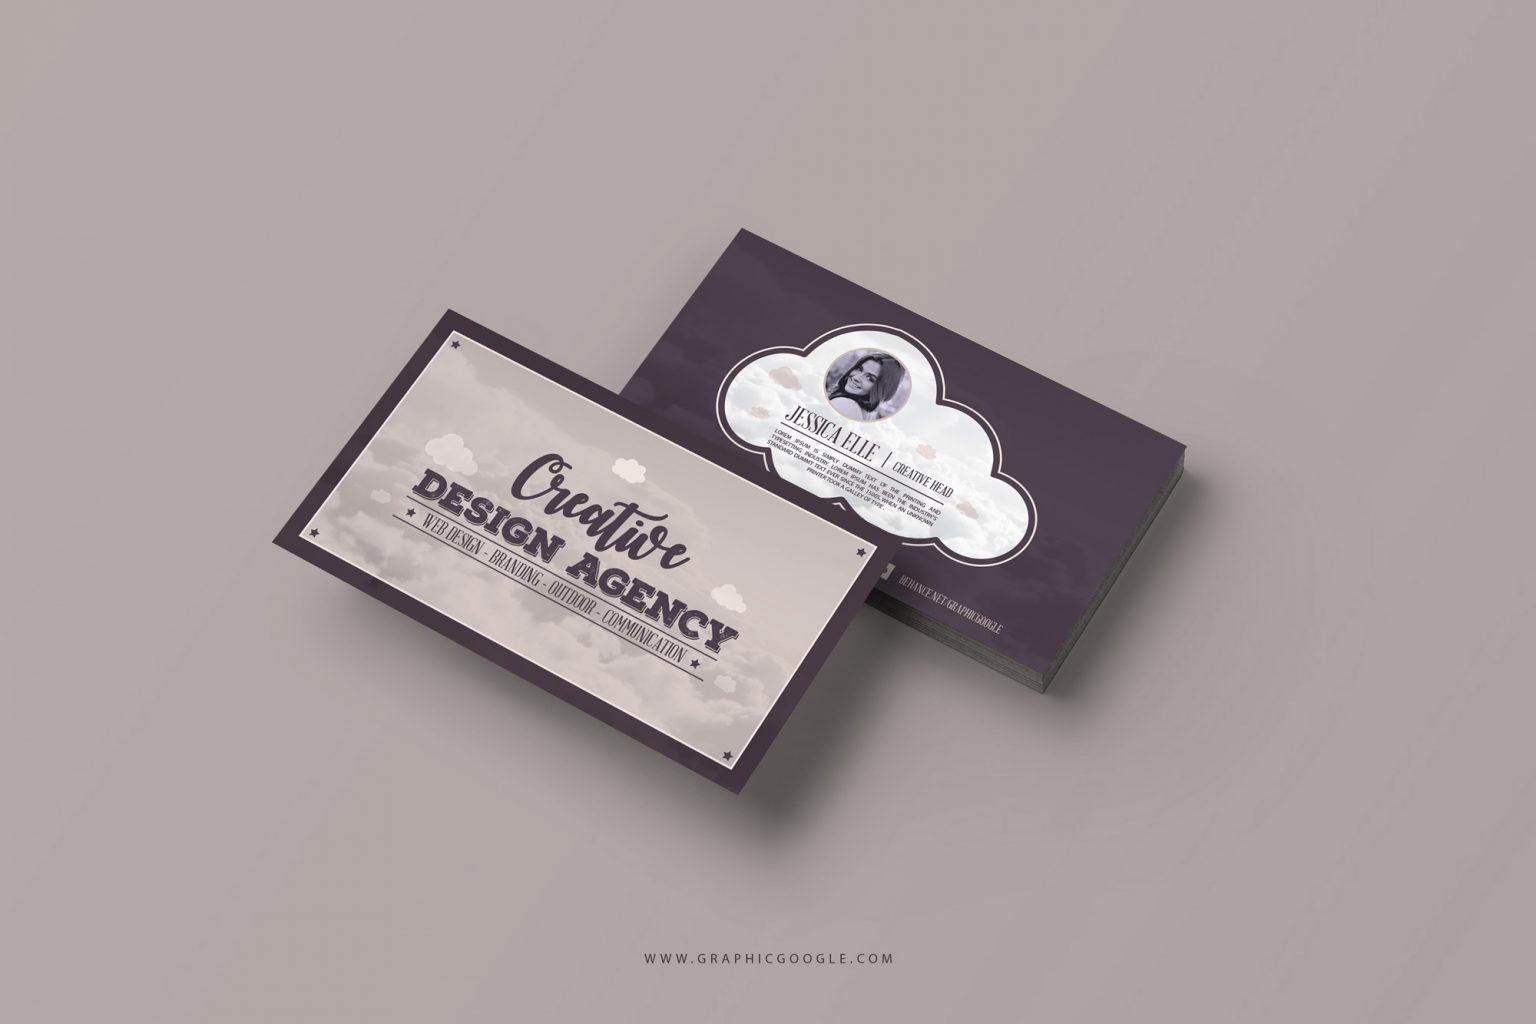 Creative Design Agency Vintage Business Card Template Free Download